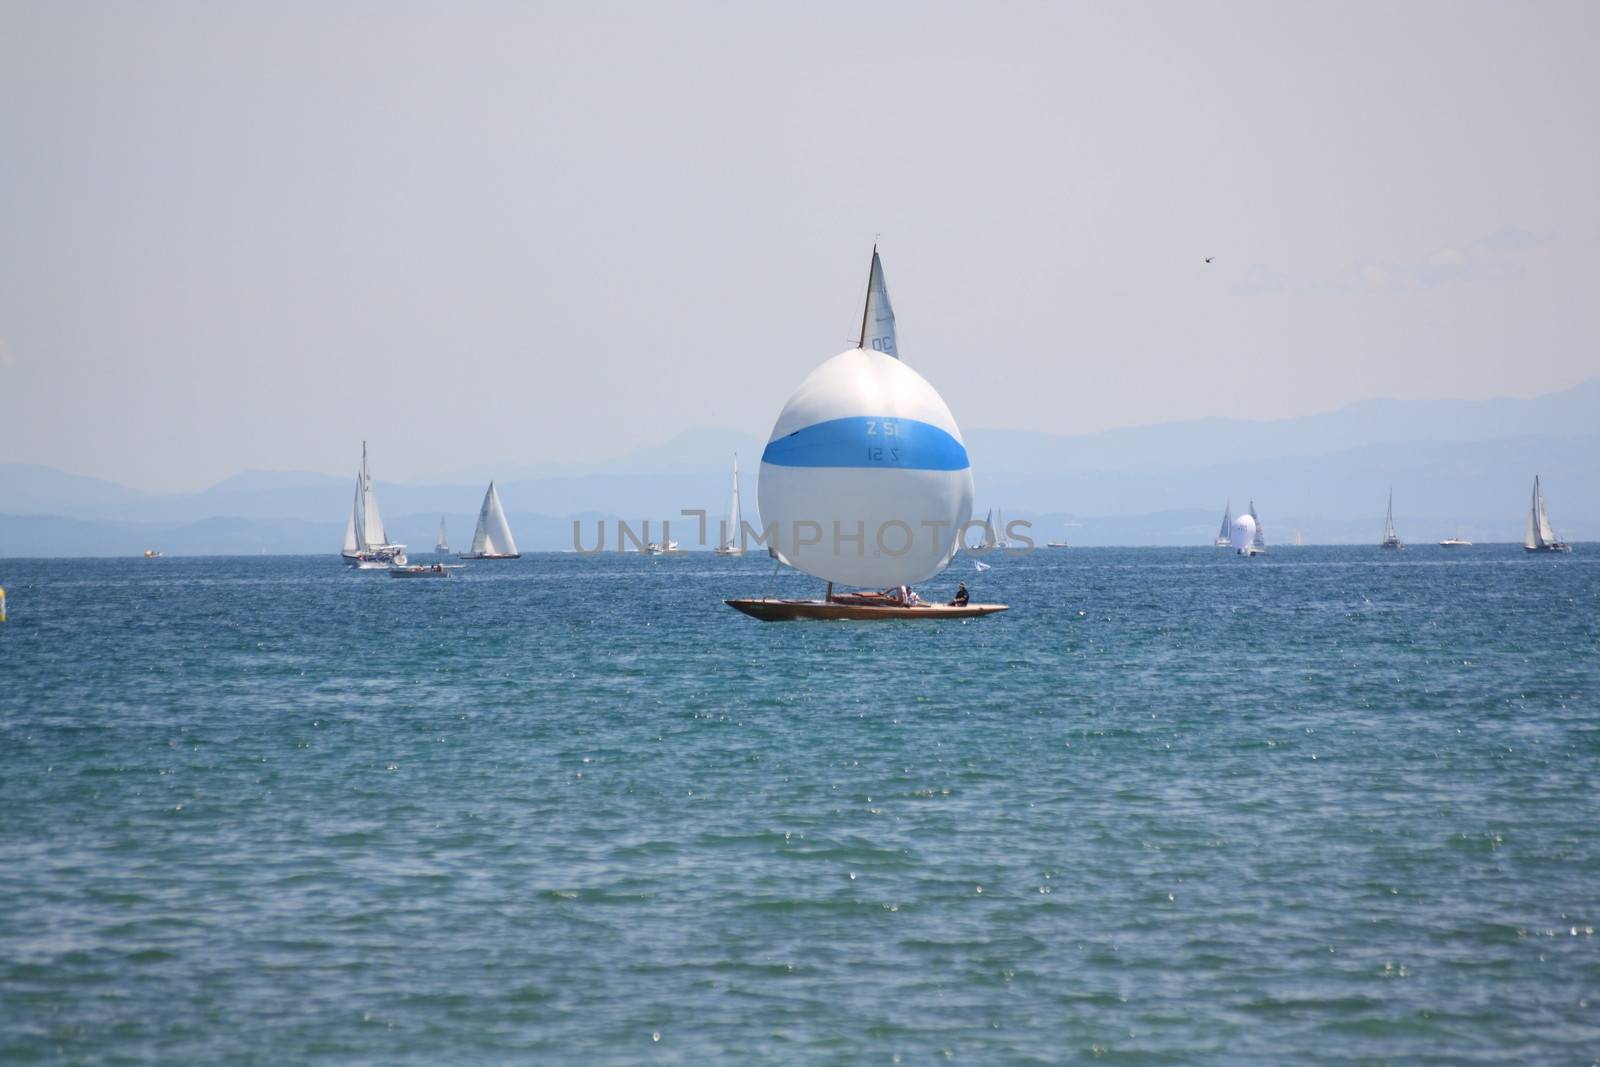 Lake of Constance with sailing boats and view of alps 